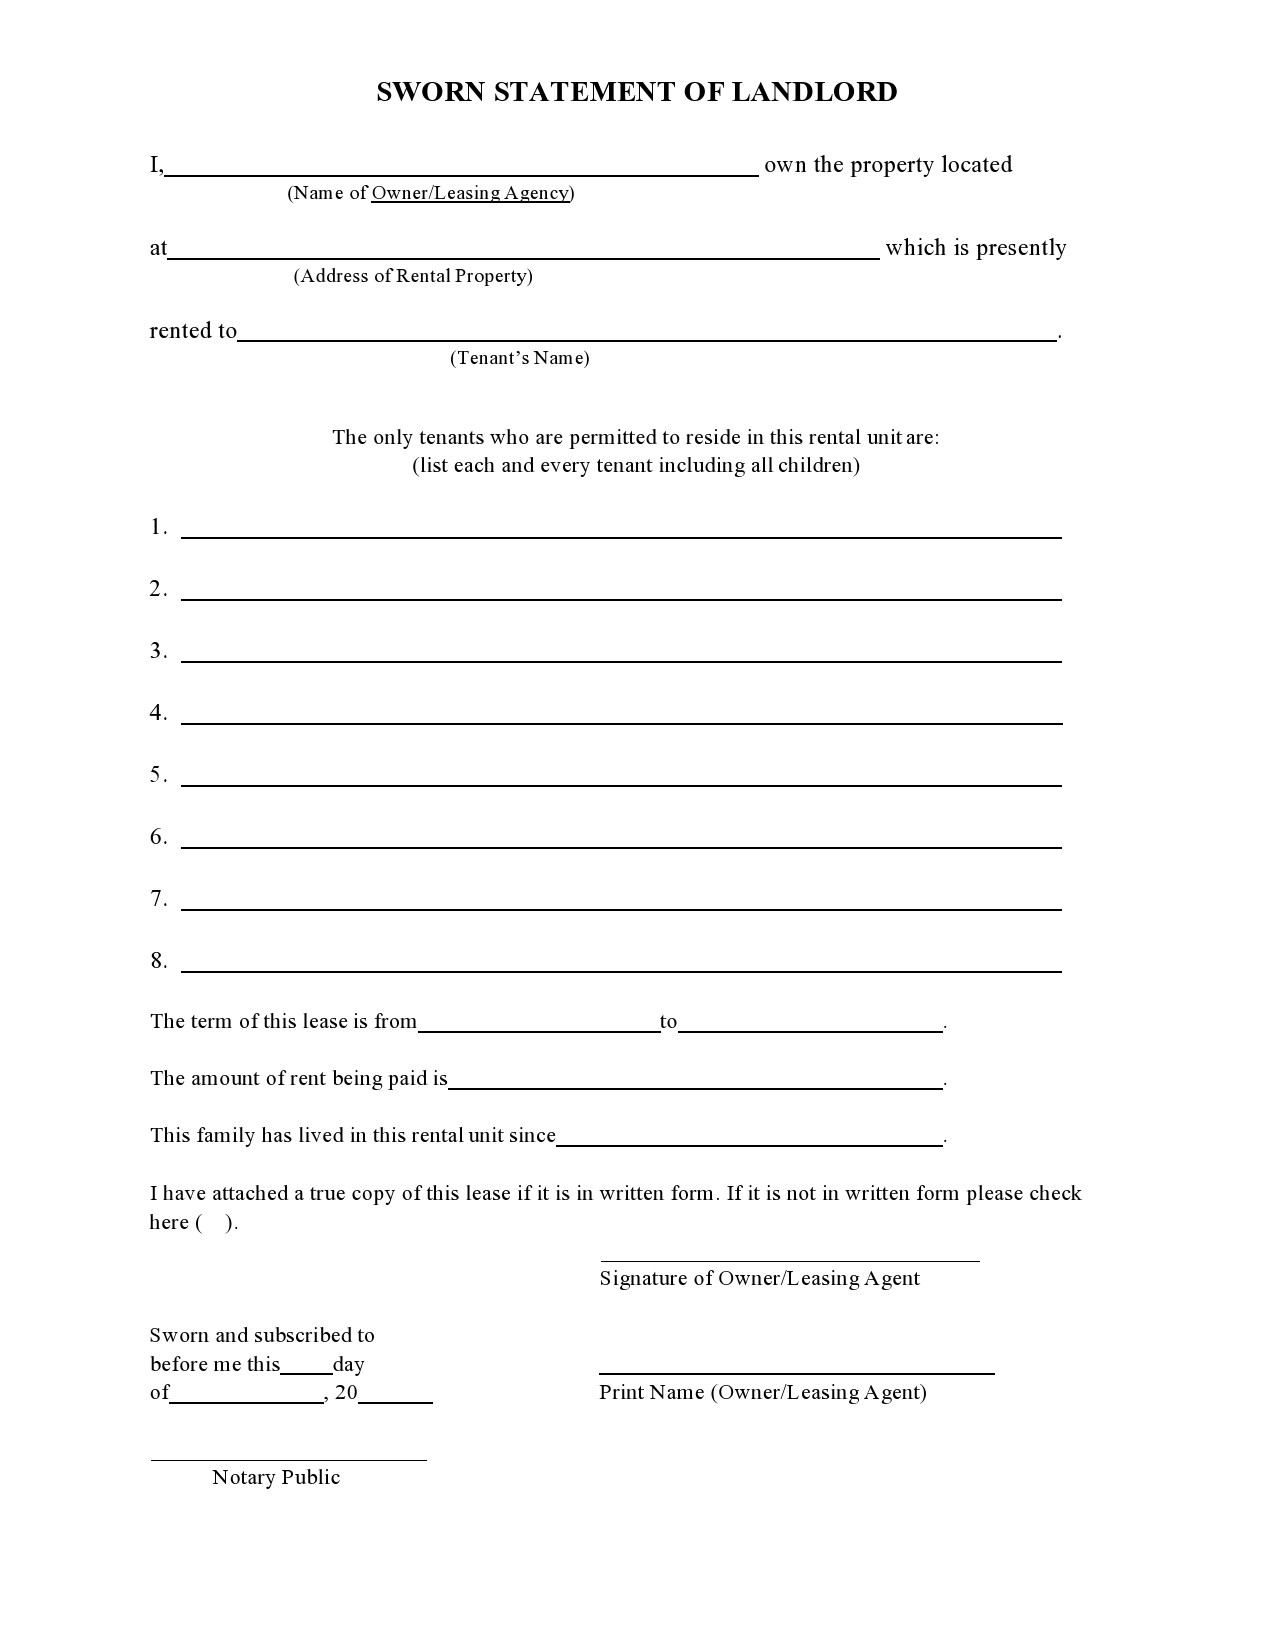 43 Perfect Landlord Statement Forms Letters ᐅ Templatelab